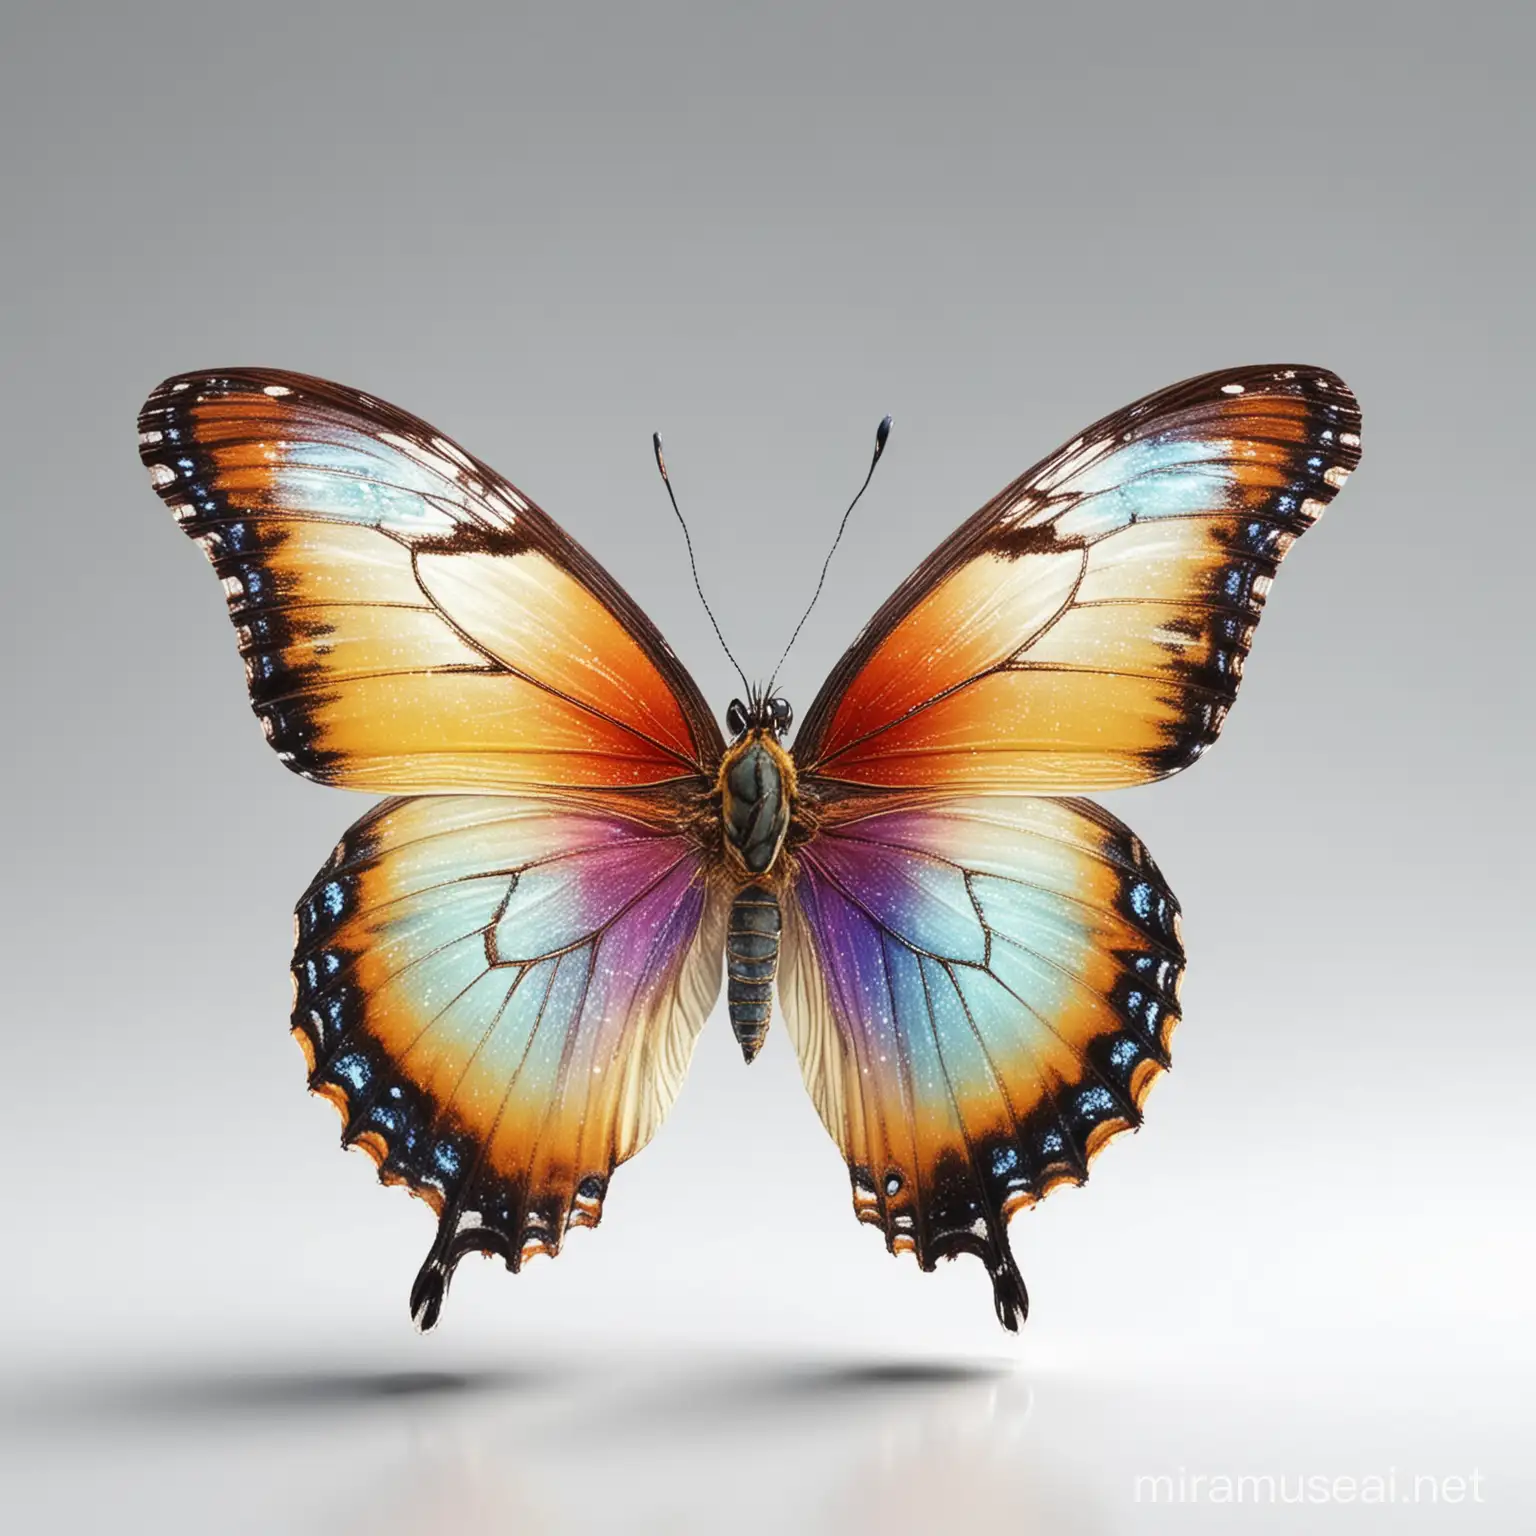 Vibrant Magic Butterfly in High Definition on White Background